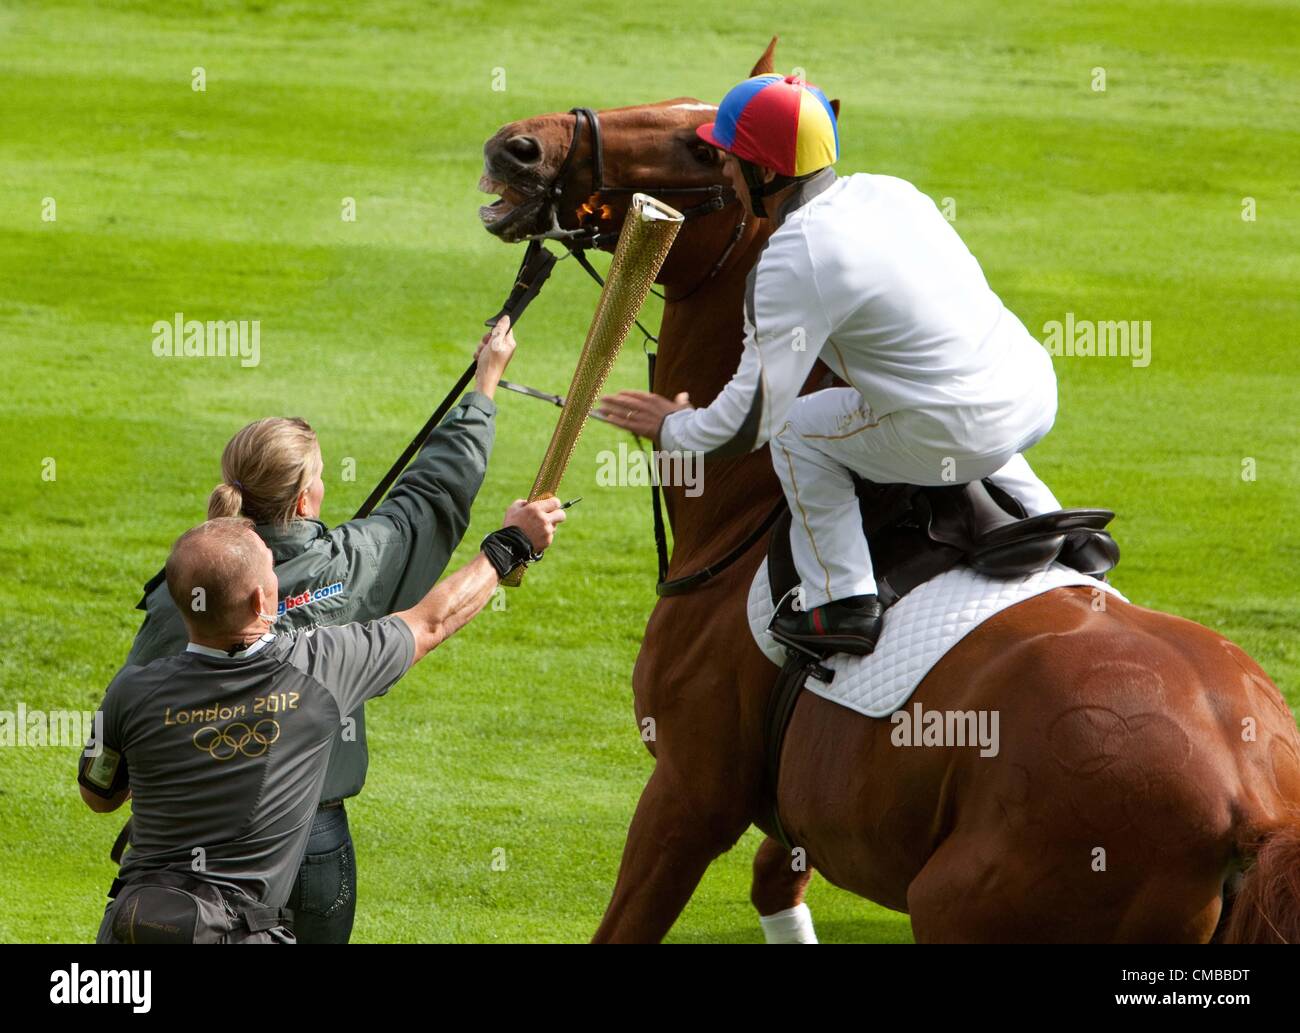 10-07-2012 : Ascot, UK - The London 2012 Olympic Torch visiting Ascot Racecourse. Denise Lewis carried the torch and passed it to jockey Frankie Dettori who carried the torch on horseback. Stock Photo